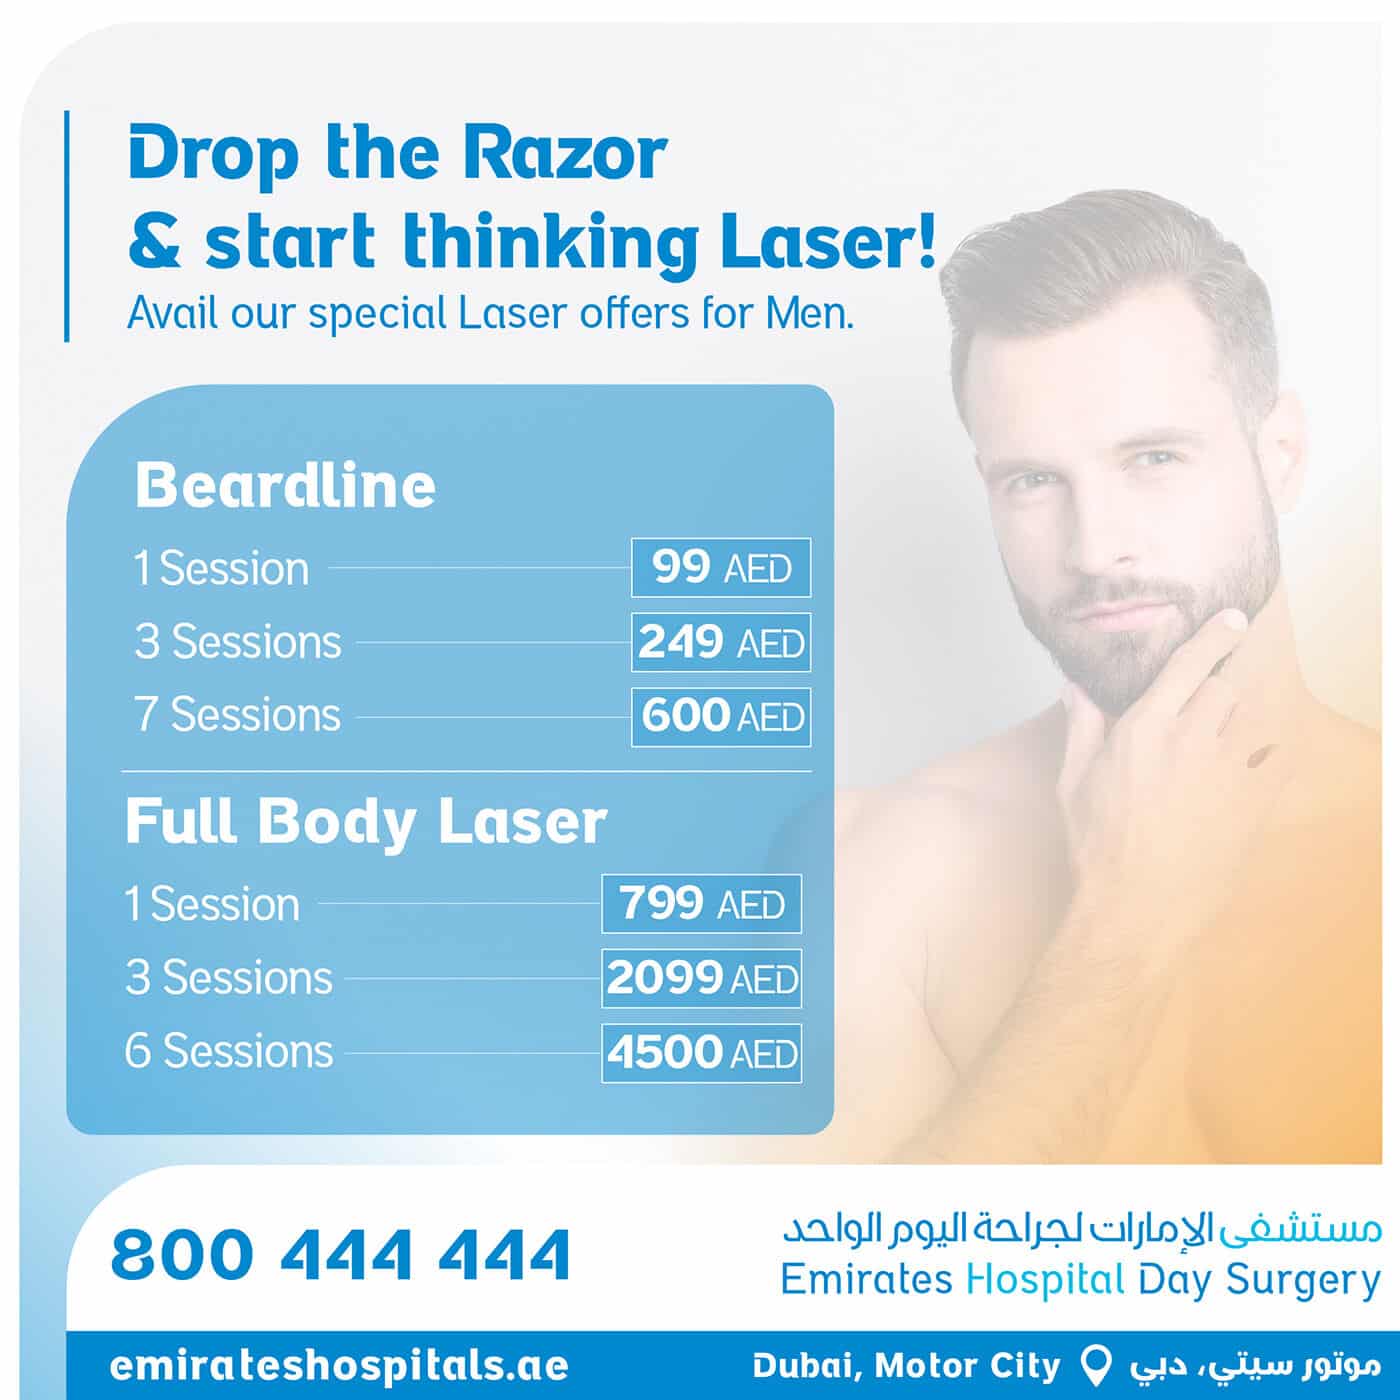 Full Body Laser and Breadline offers for Man , Emirates Hospital Day Surgery, Motor City